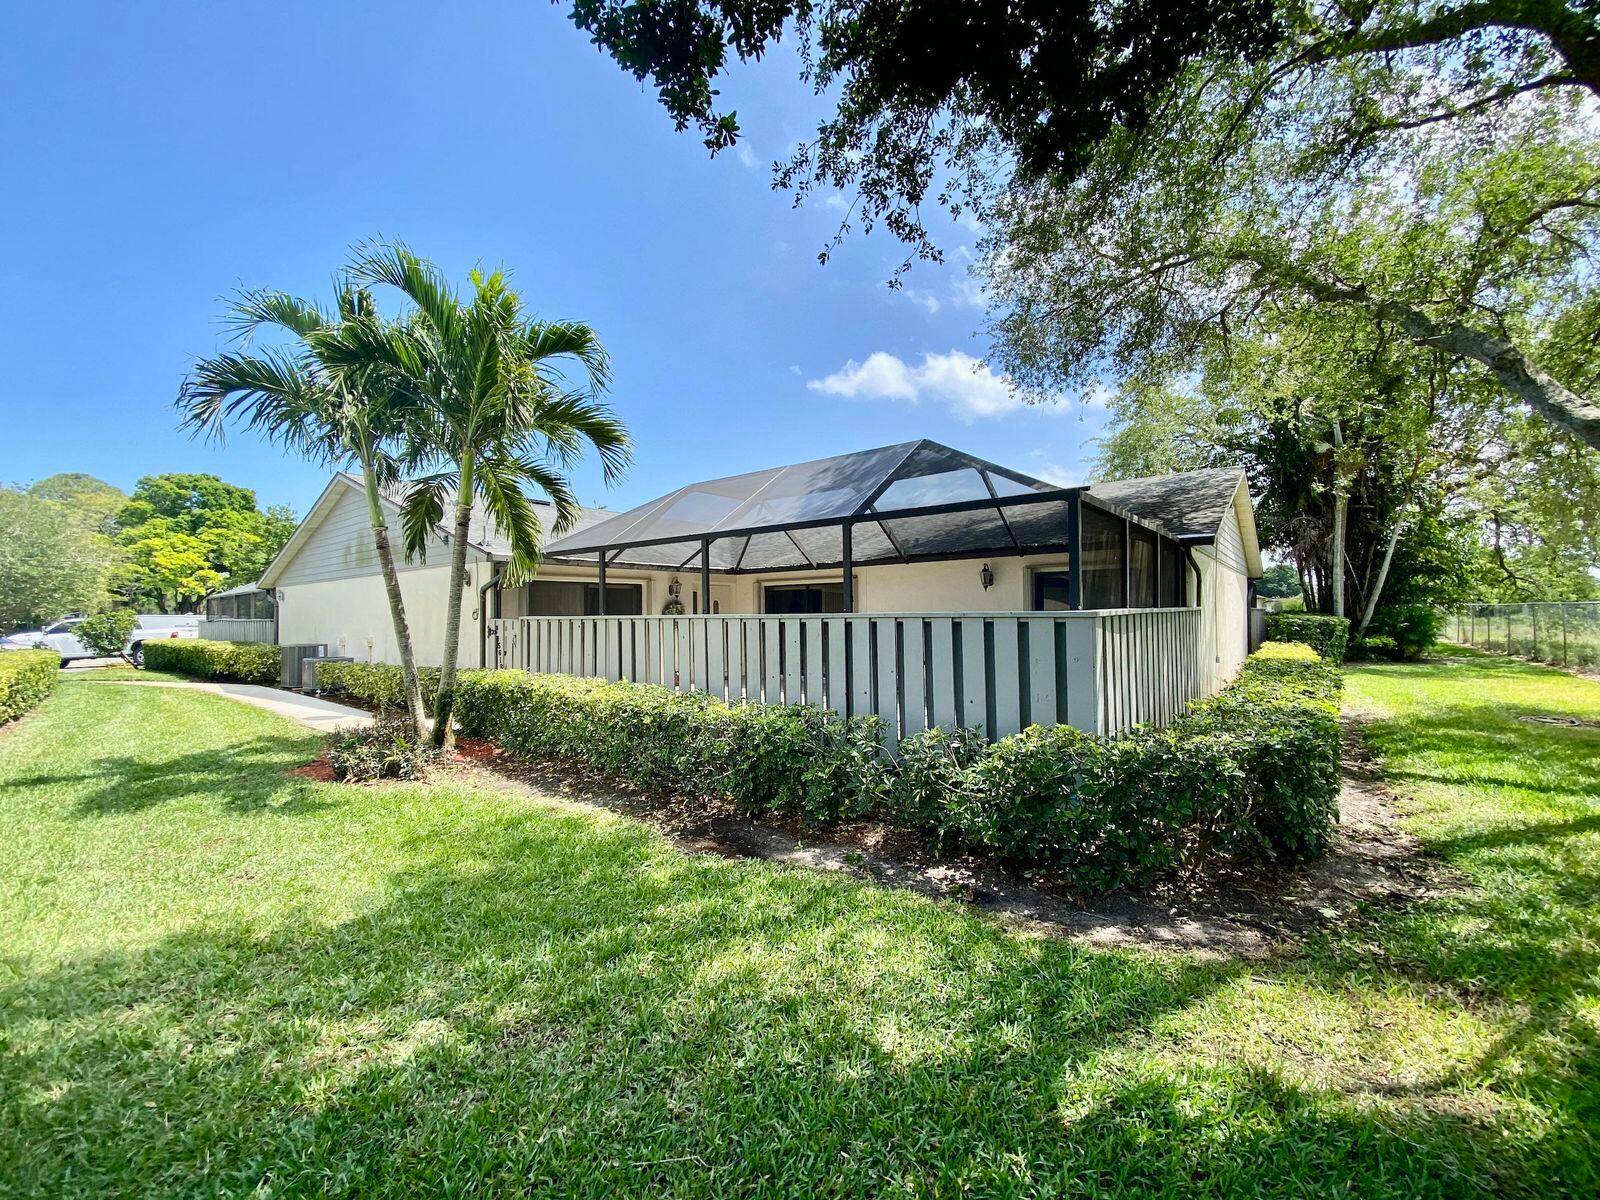 Nestled in proximity to Lawnwood Regional Hospital, Lawnwood Park, downtown shopping, and the pristine beaches of Fort Pierce, this meticulously maintained villa offers a blend of comfort and convenience.